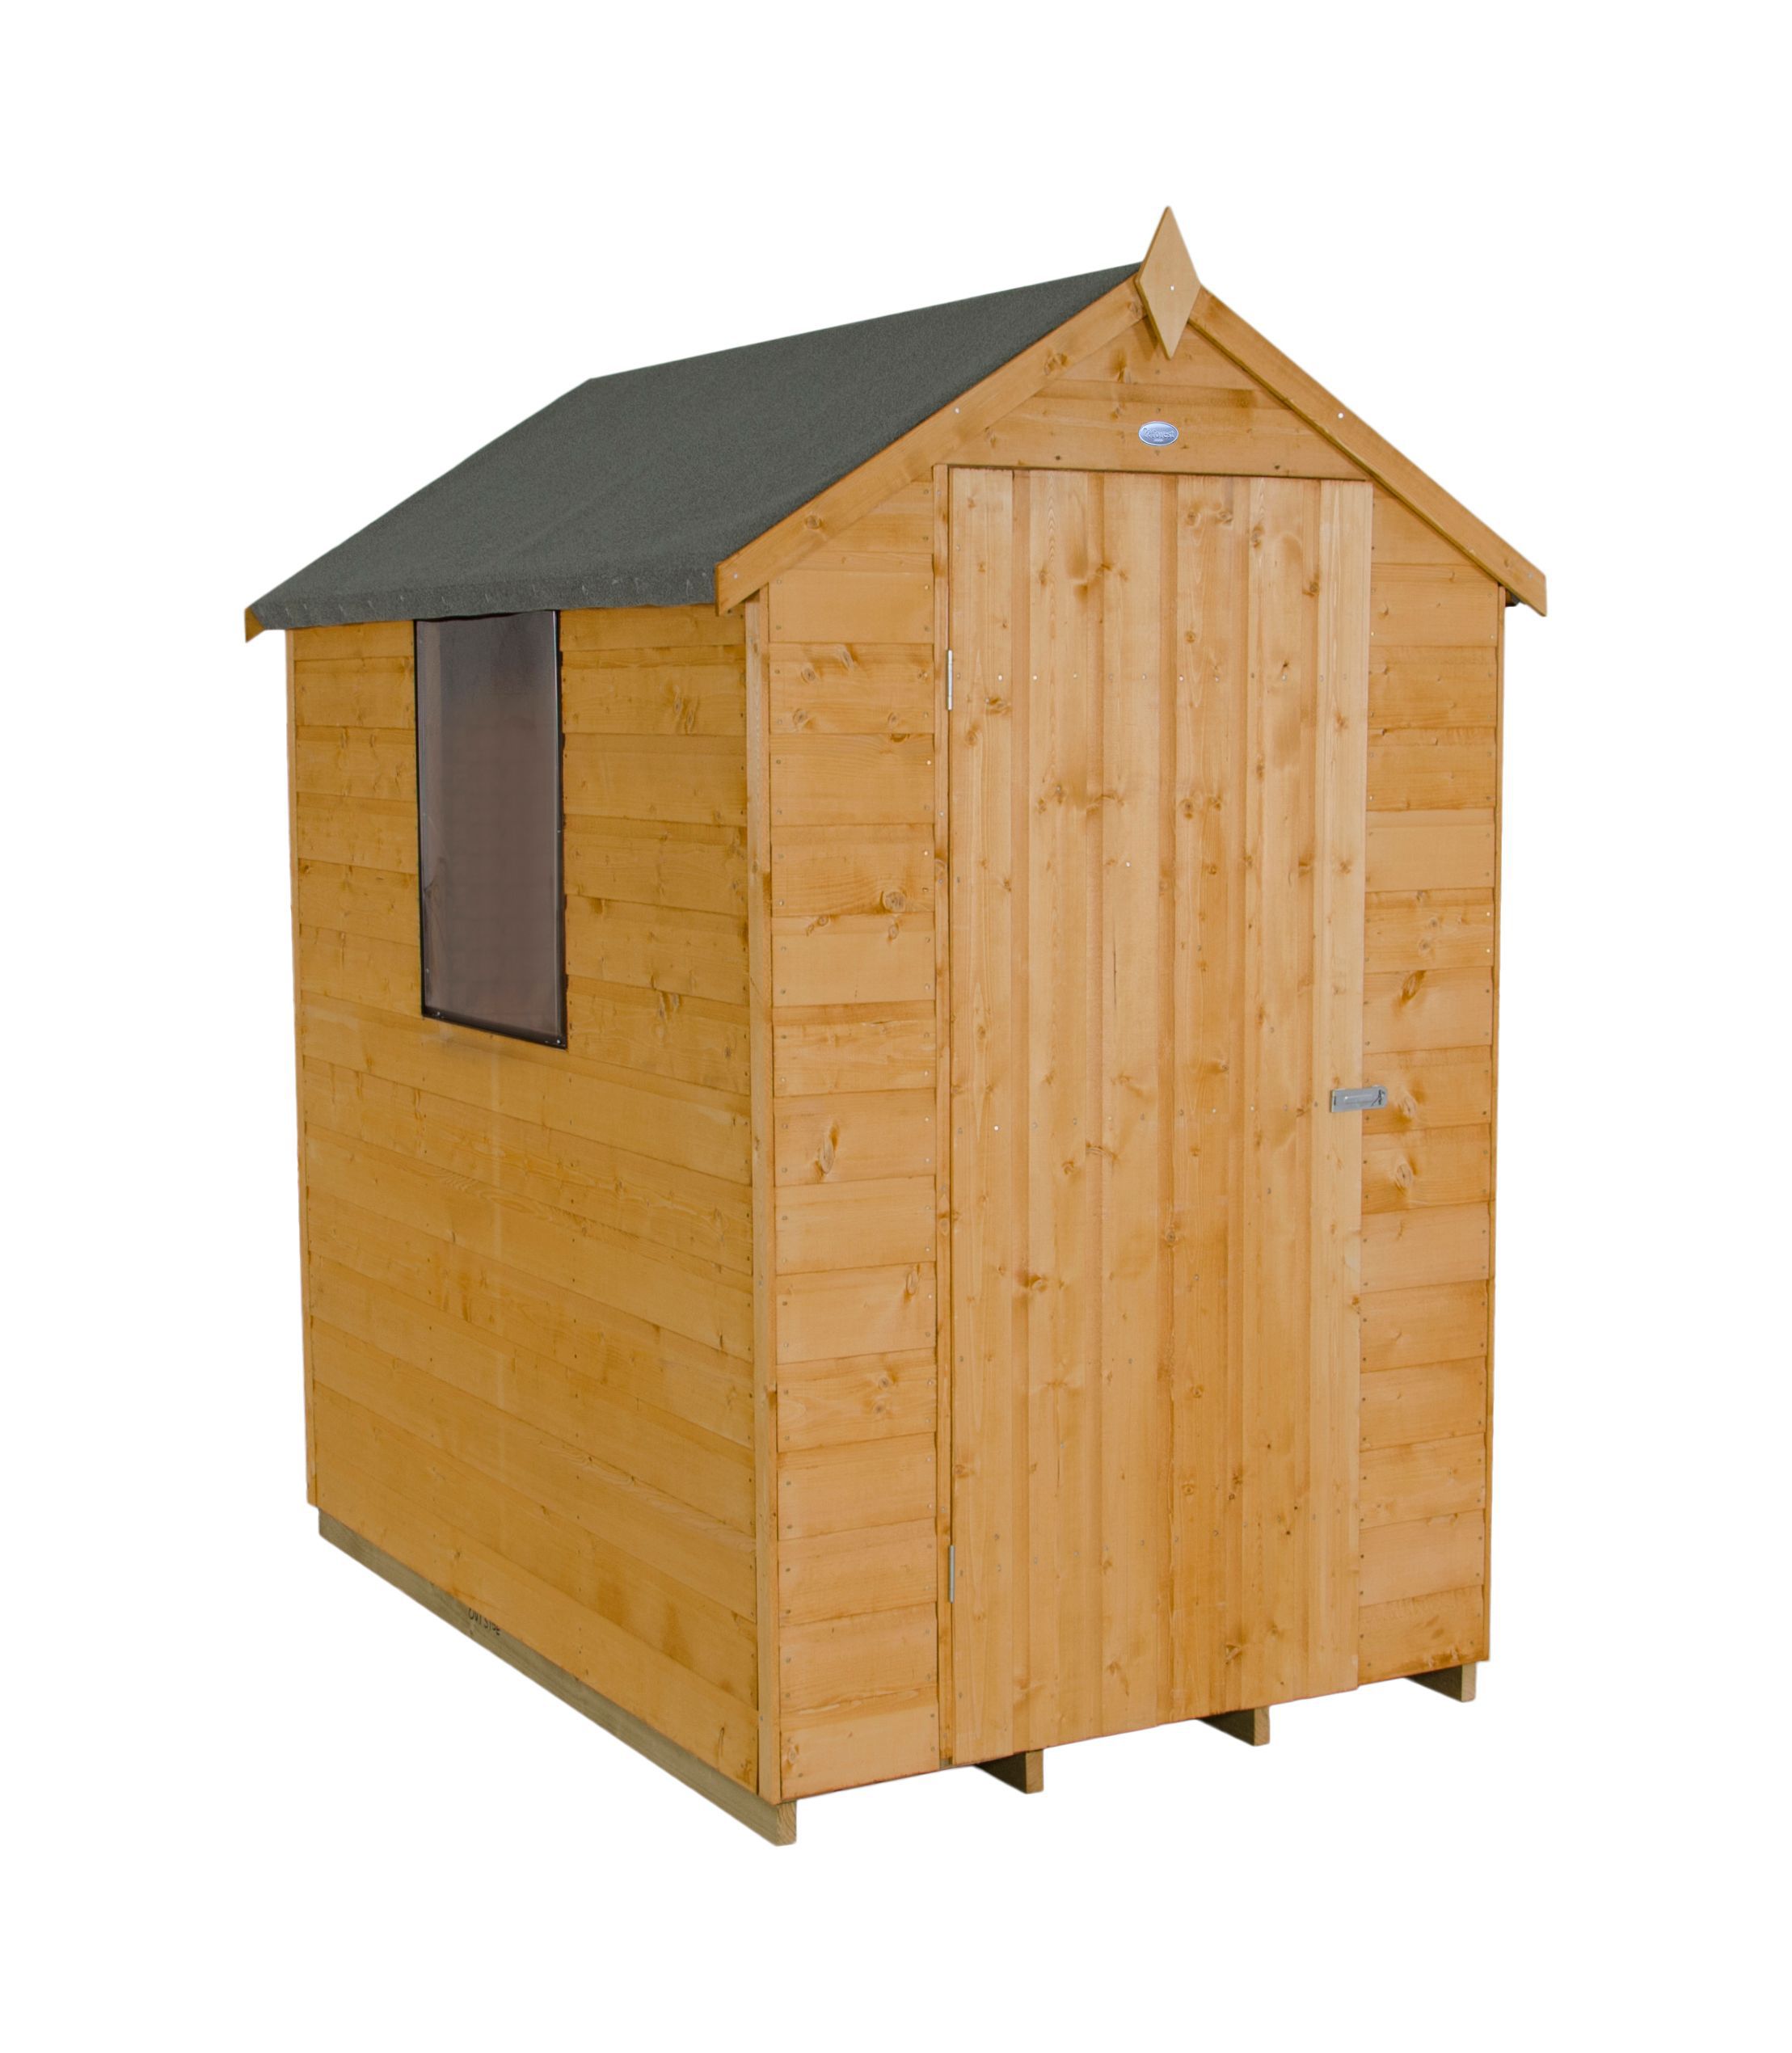 Forest Garden 6x4 Apex Shiplap Wooden Shed